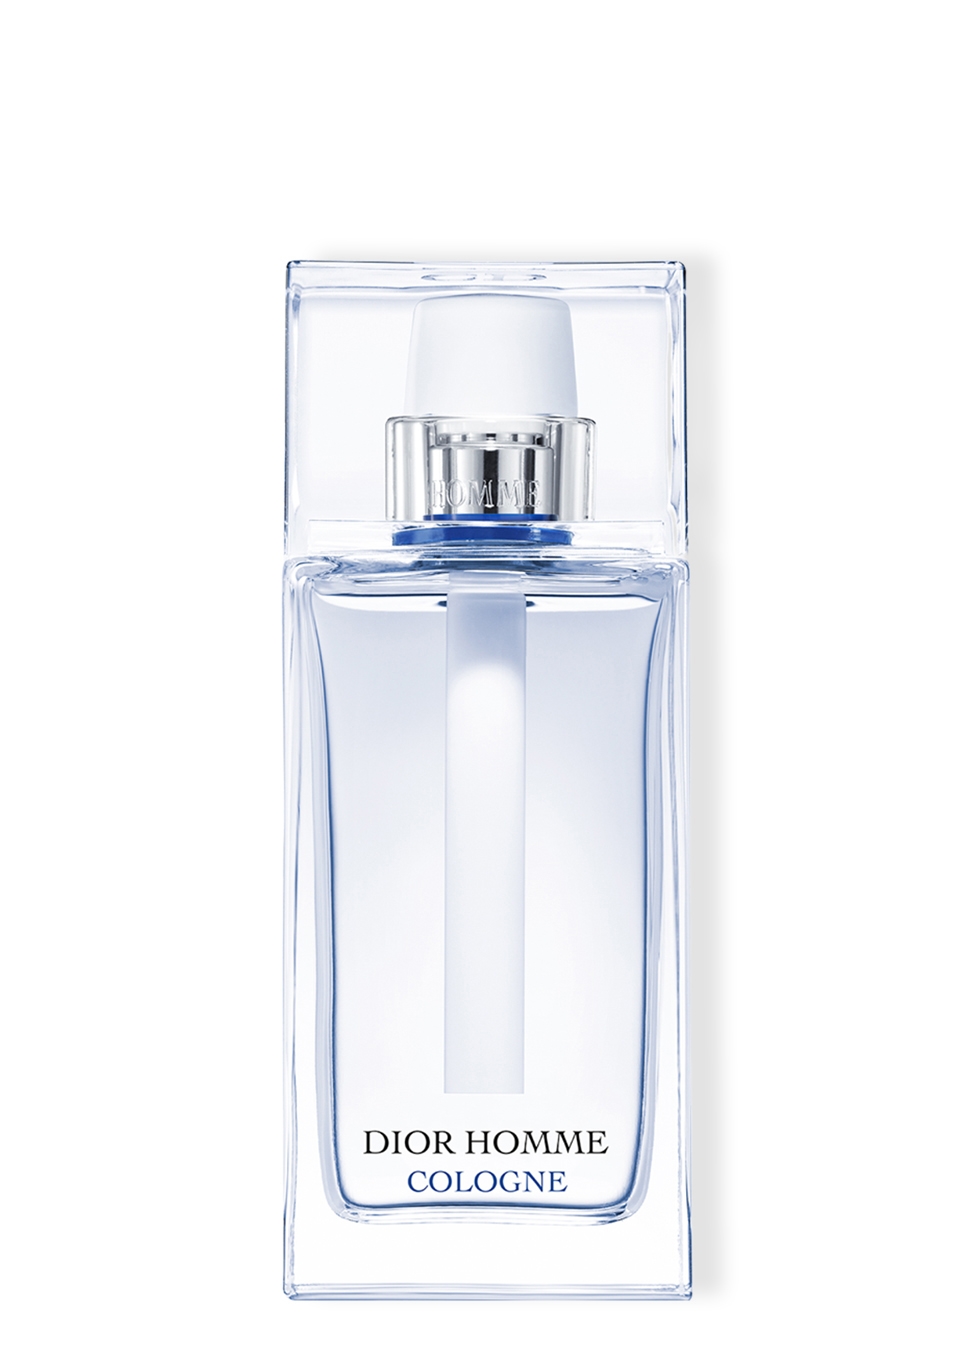 dior homme cologne 75 ml